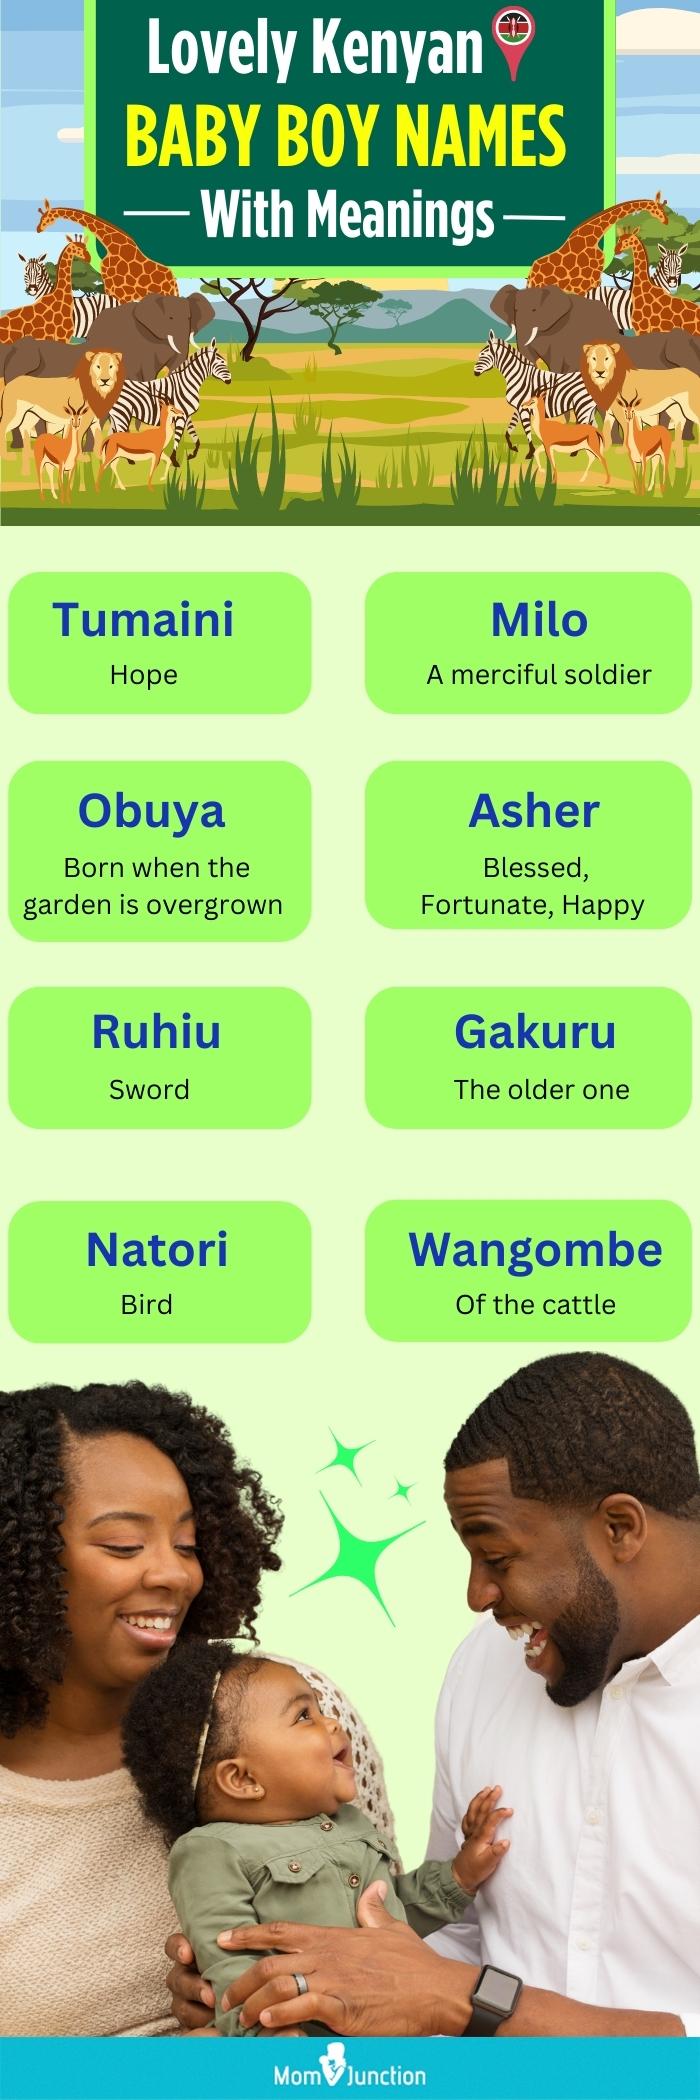 lovely kenyan baby boy names with meanings (infographic)